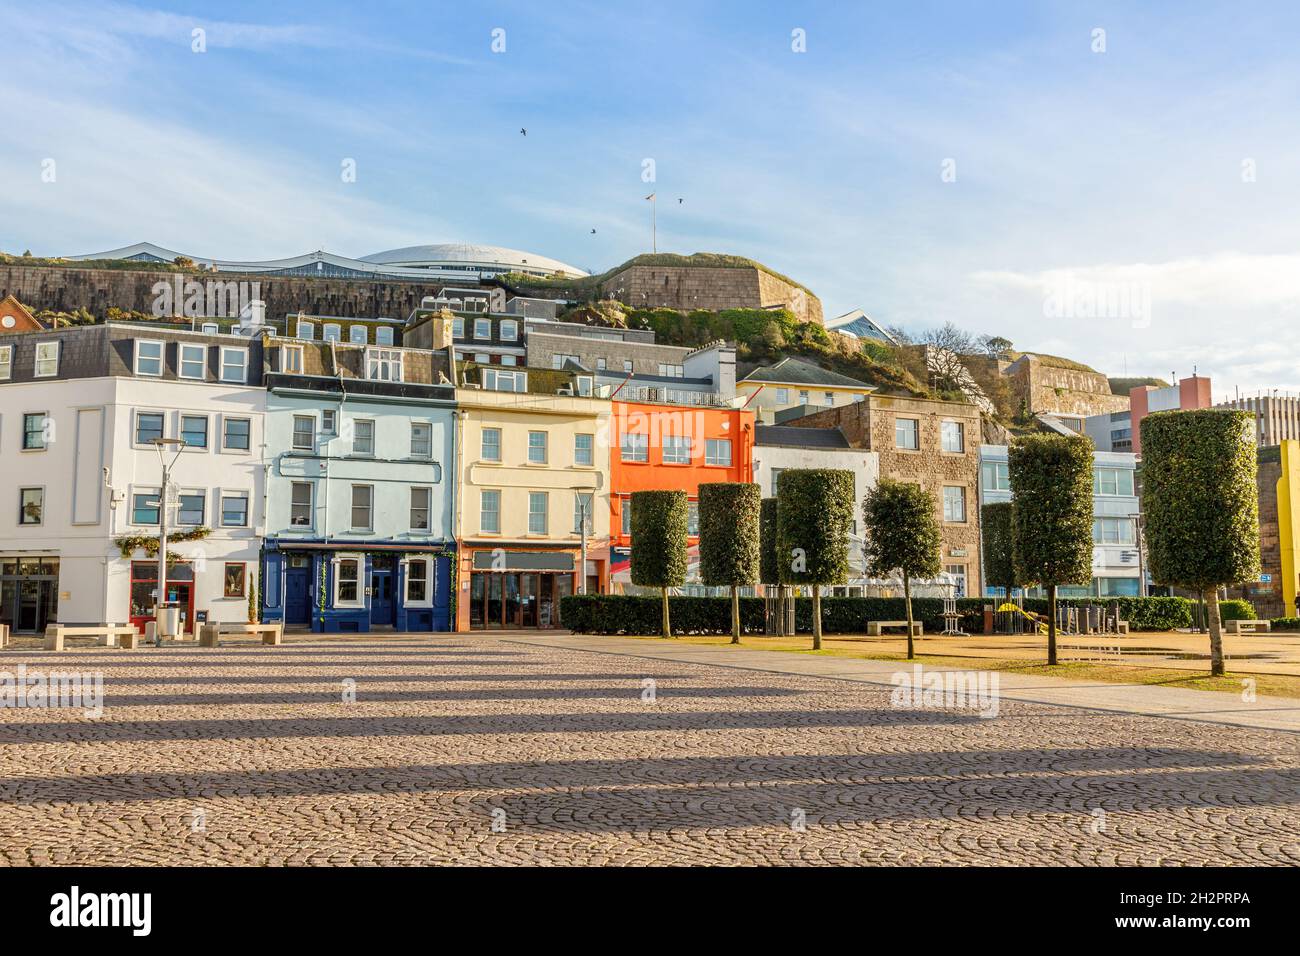 Saint Helier central square with fort Regent int the background, bailiwick of Jersey, Channel Islands Stock Photo